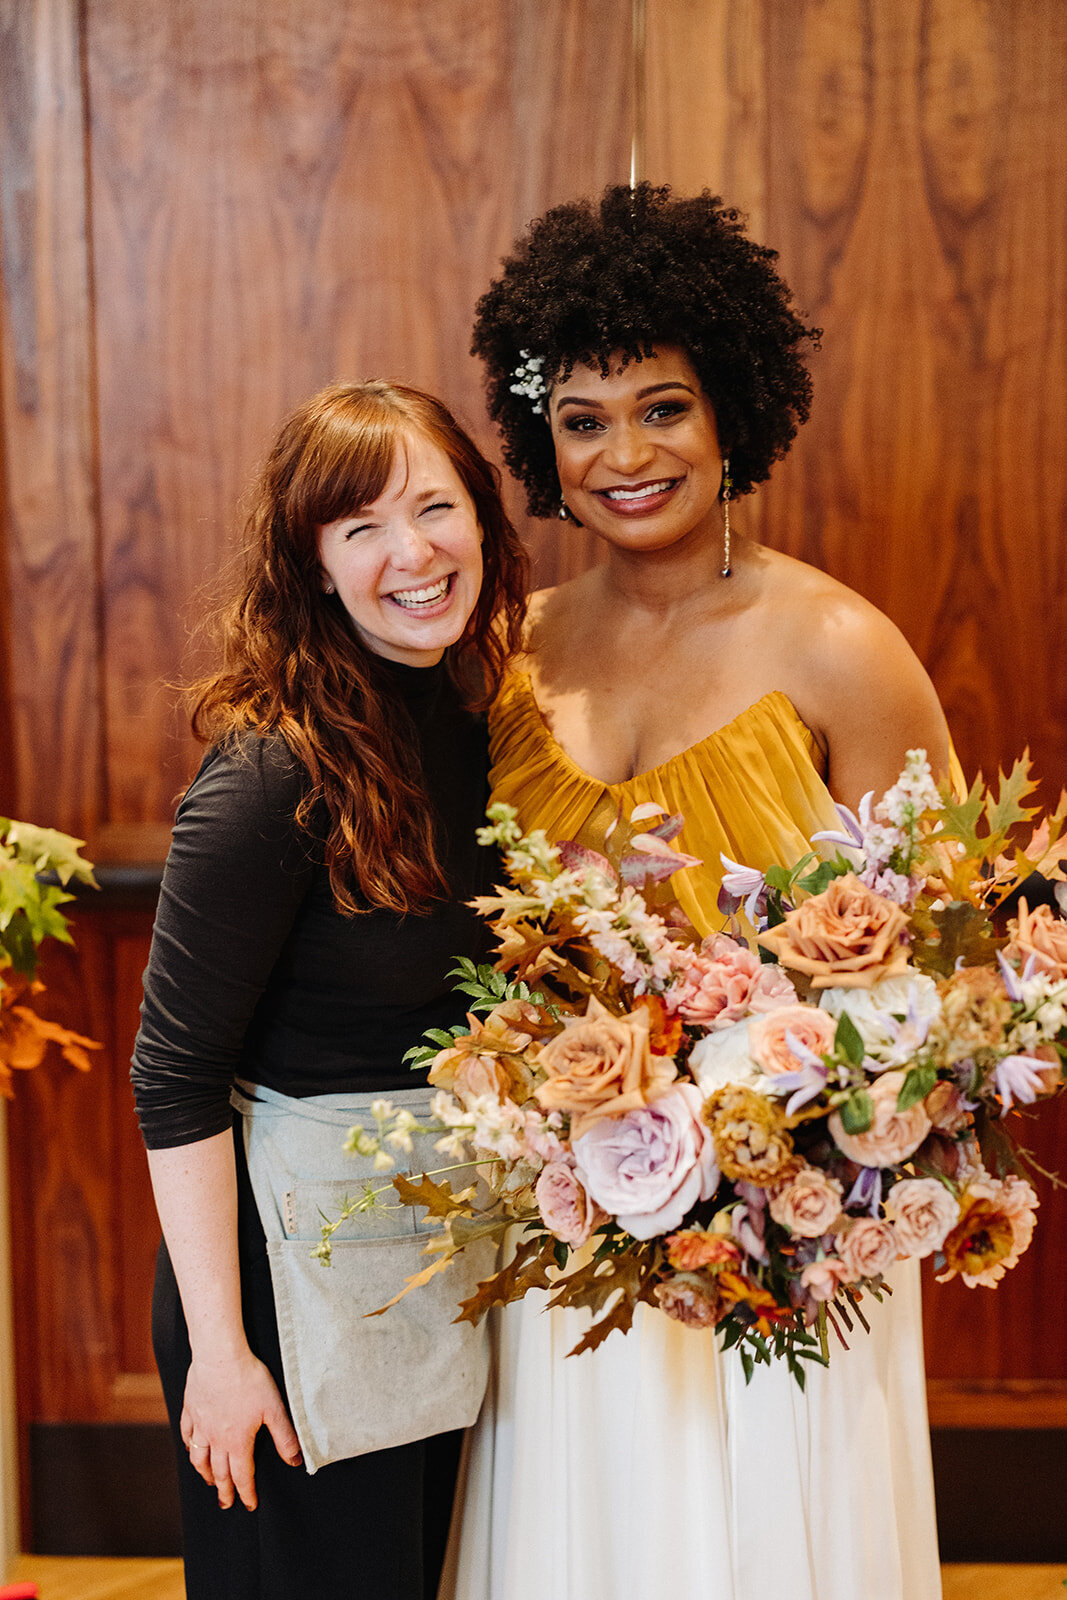 Beautiful autumnal bridal bouquet composed of roses, ranunculus, delphinium, clematis, lisianthus, and fall foliage floral hues of burnt orange, mauve, dusty rose, taupe, and lavender. Design by Rosemary and Finch in Nashville, TN.